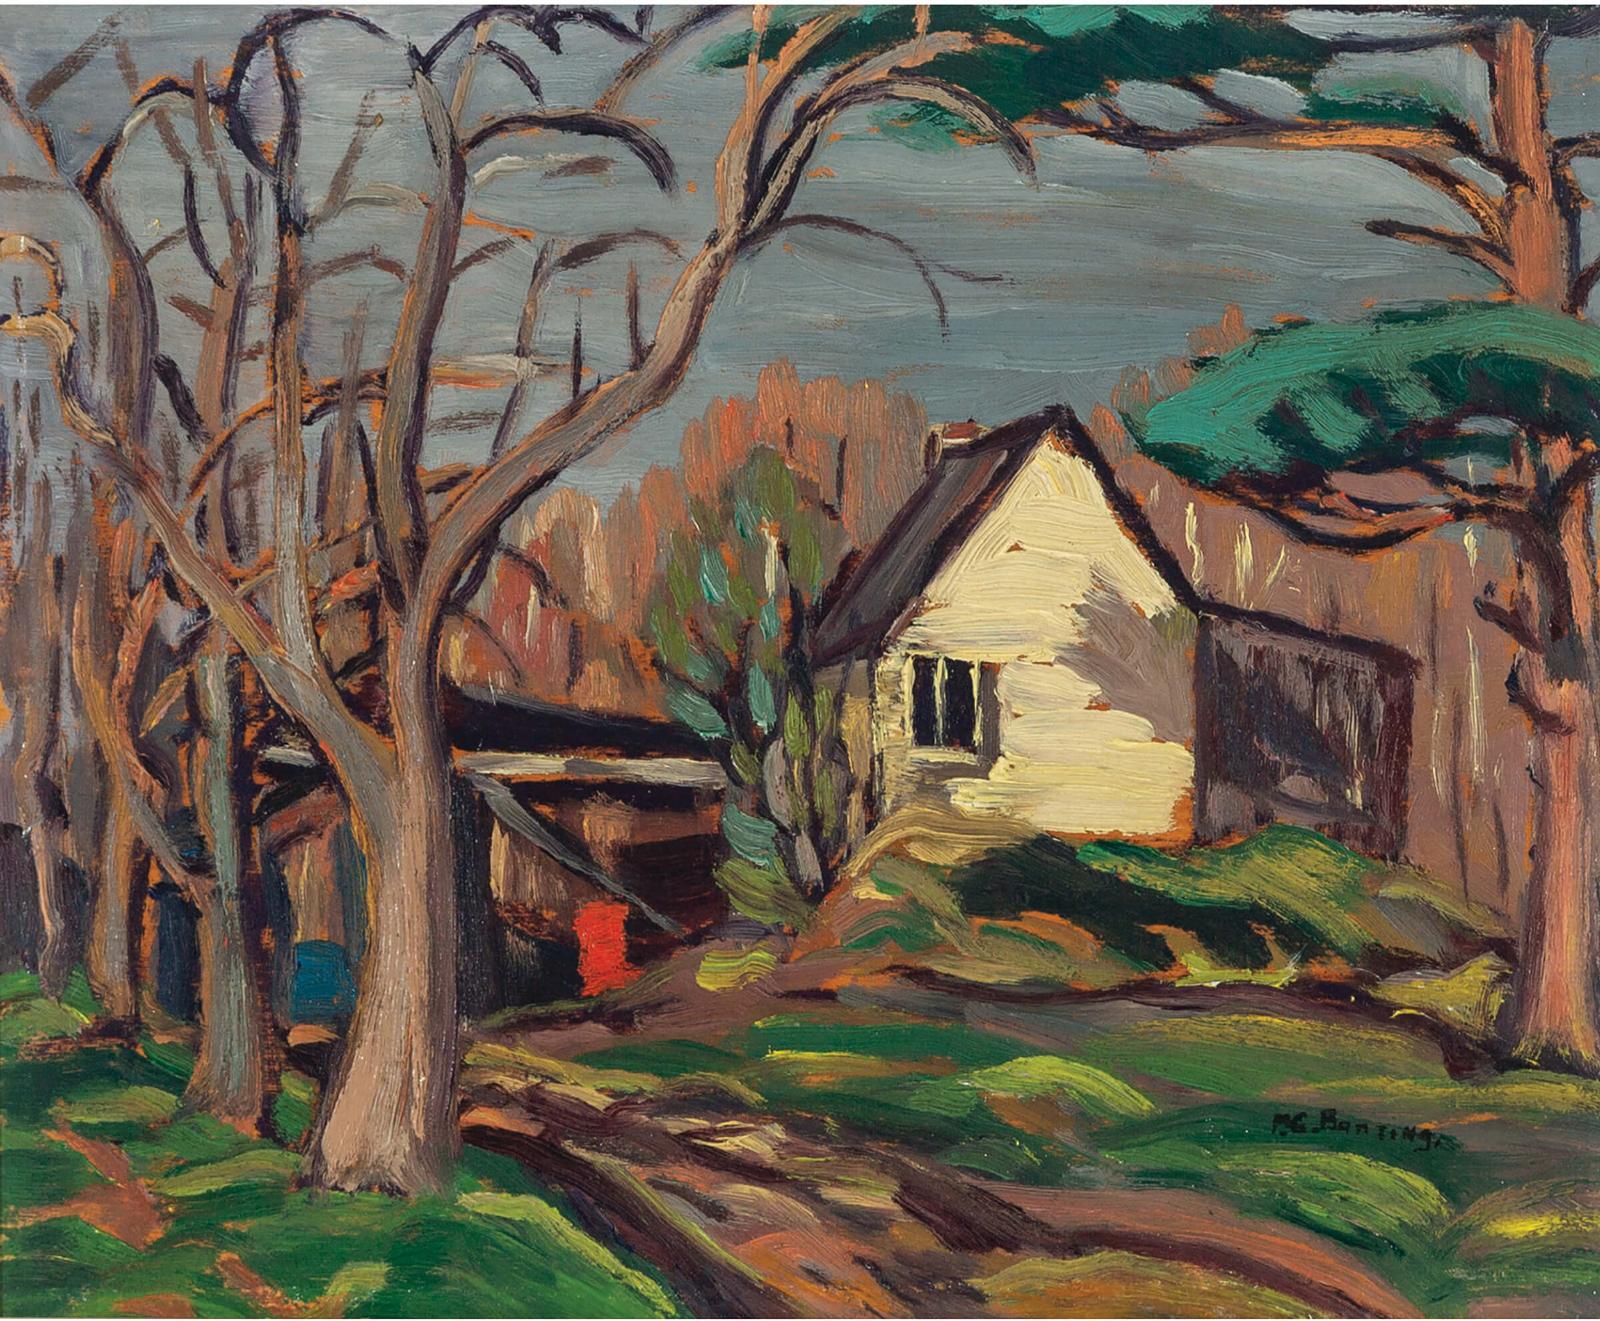 Sir Frederick Grant Banting (1891-1941) - Cottage In A Wooded Landscape